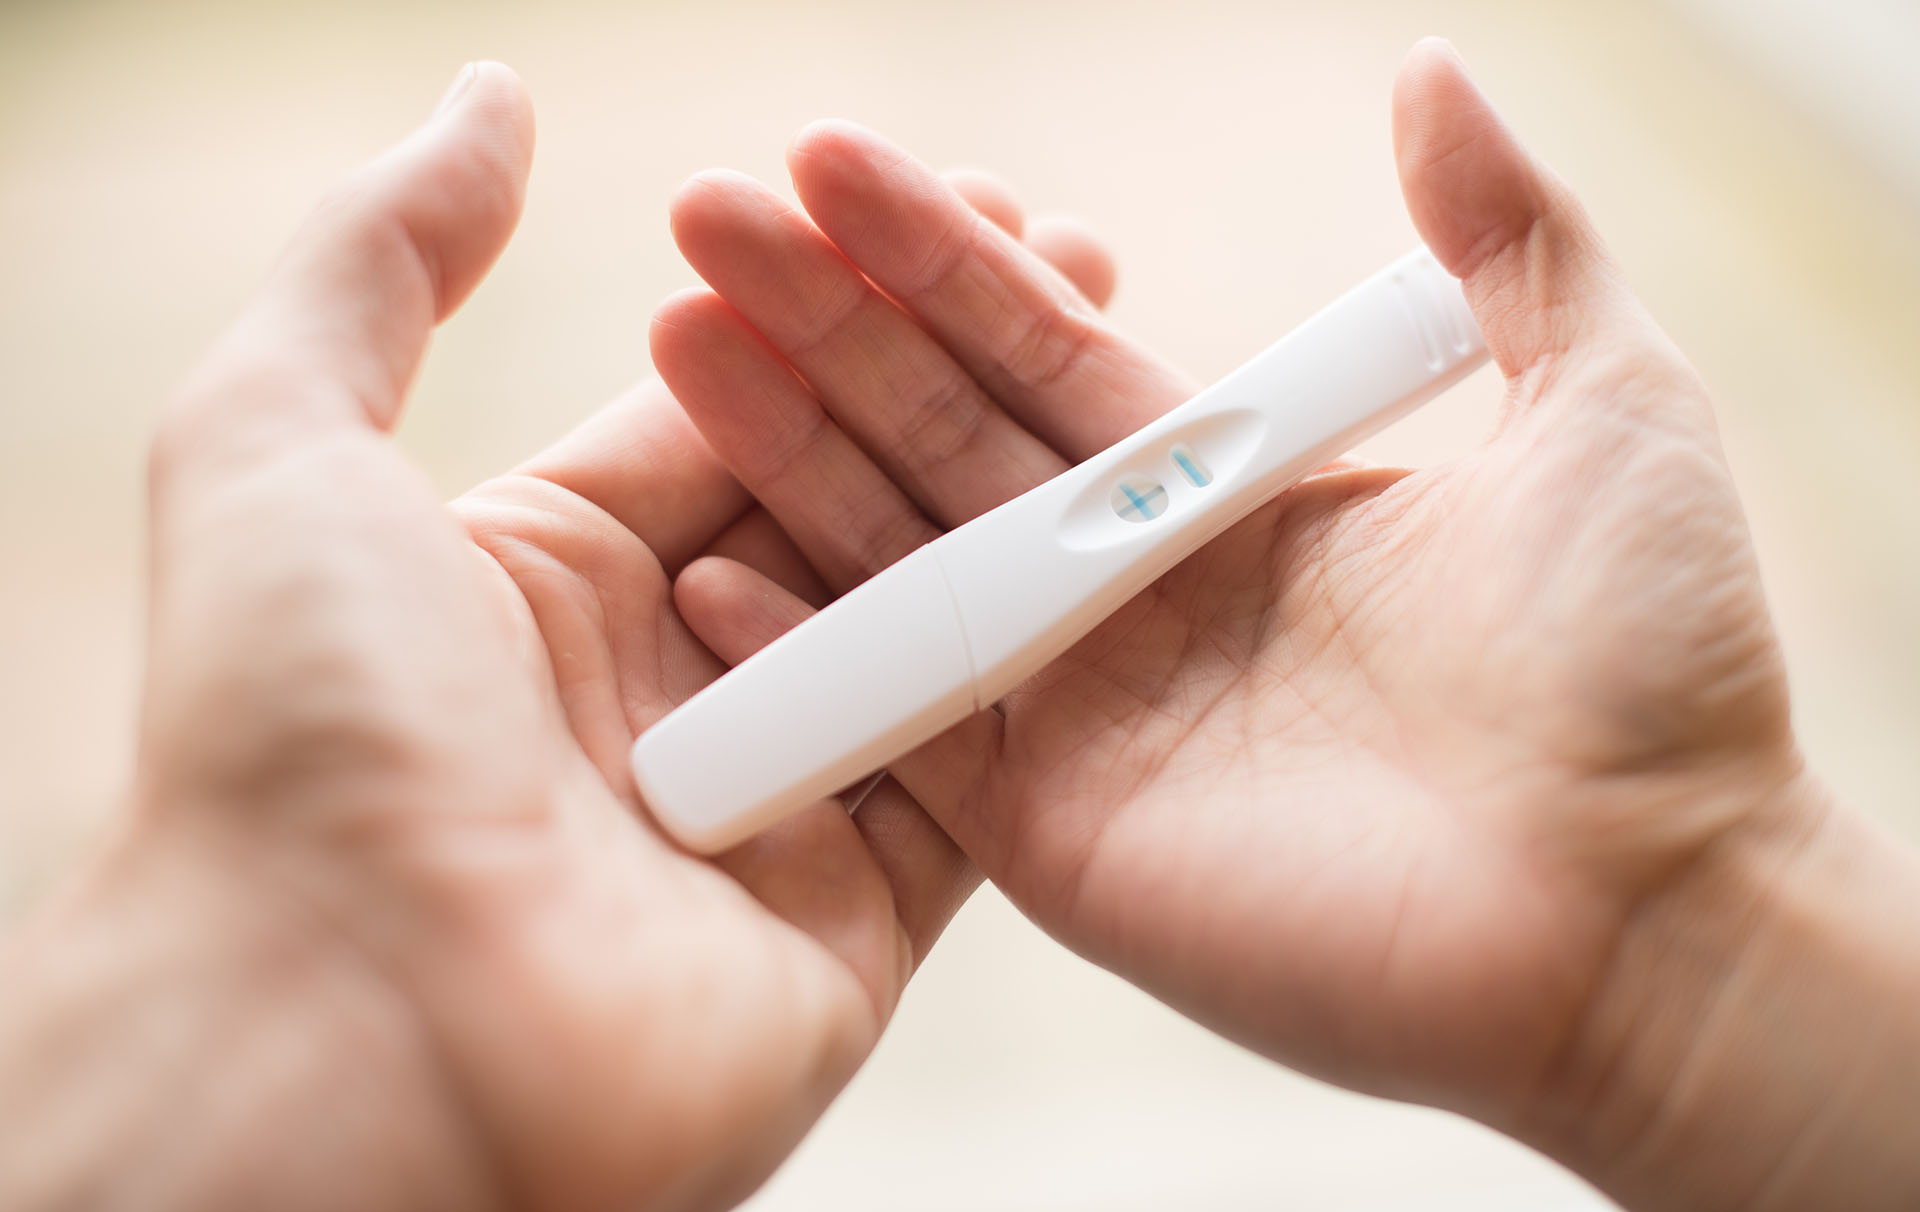 8 Early signs that you might need pregnancy test